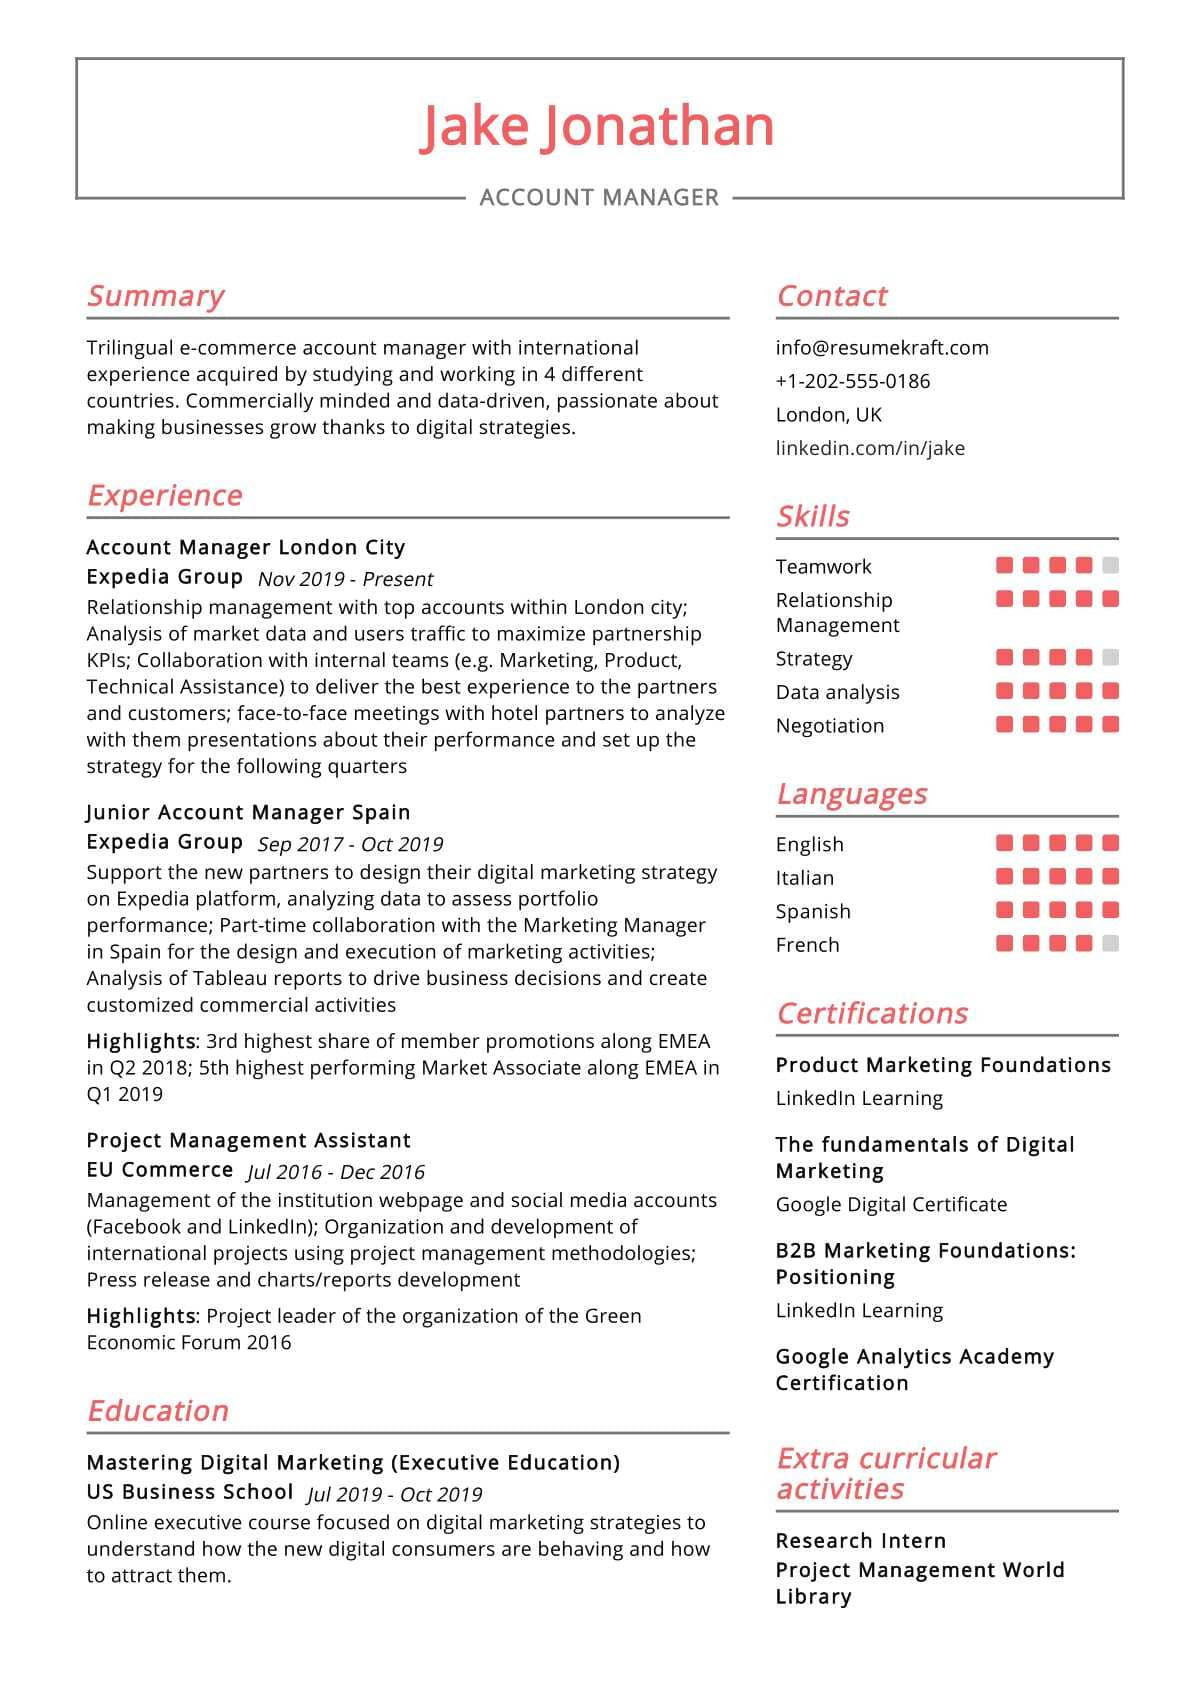 Free Sample Resume for Account Manager Account Manager Resume Sample 2022 Writing Tips – Resumekraft